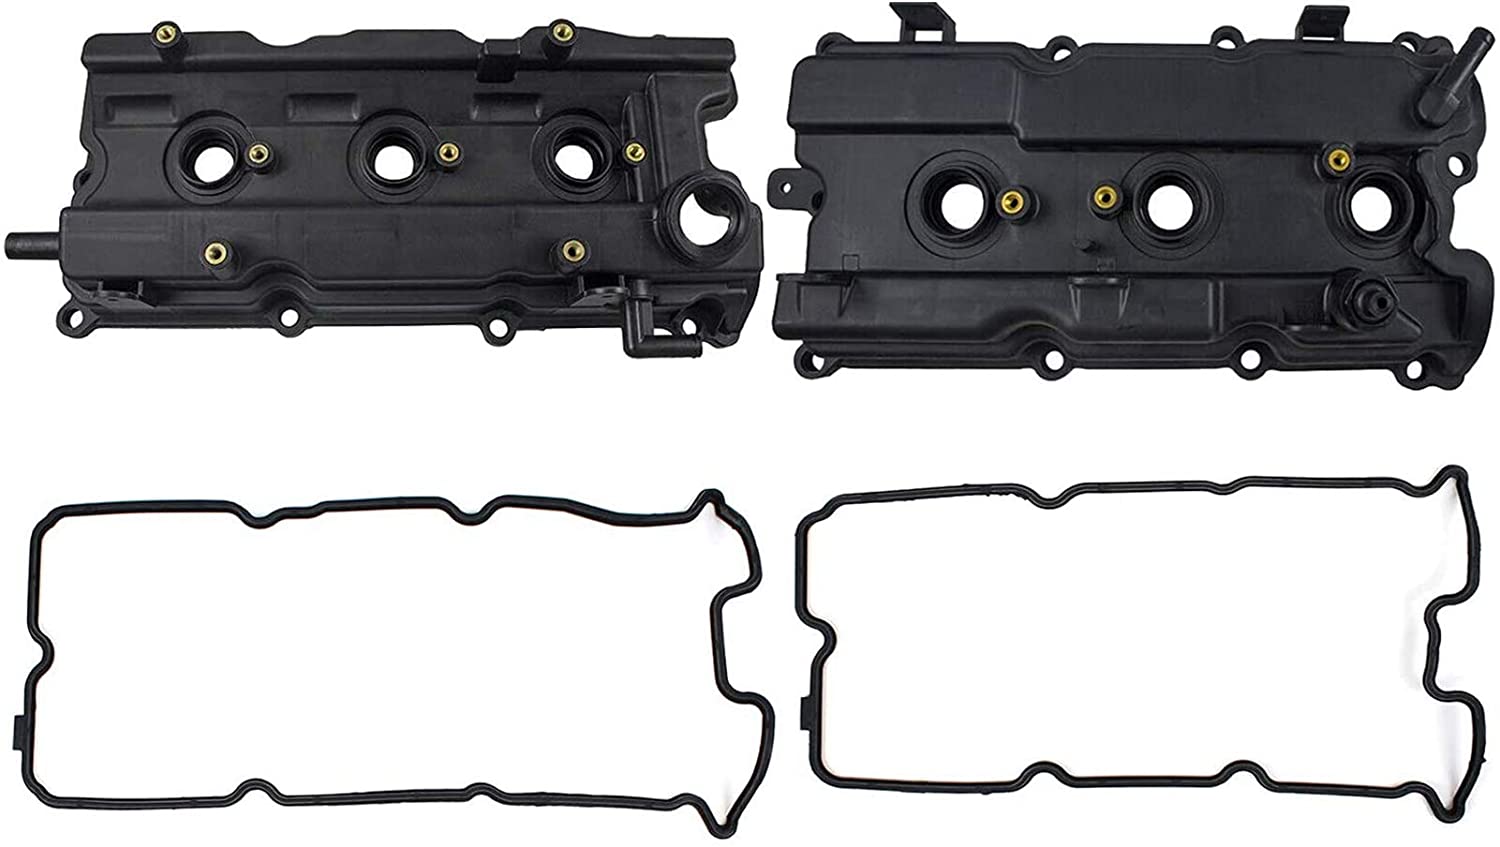 264-985 264-984 Set of Left & Right Engine Valve Cover Fits for Altima Maxima Murano Quest V6 3.5L 2002-2009 Infiniti I35 V6 3.5L 02-04 Replace# 13264-8J113 13264-7Y000